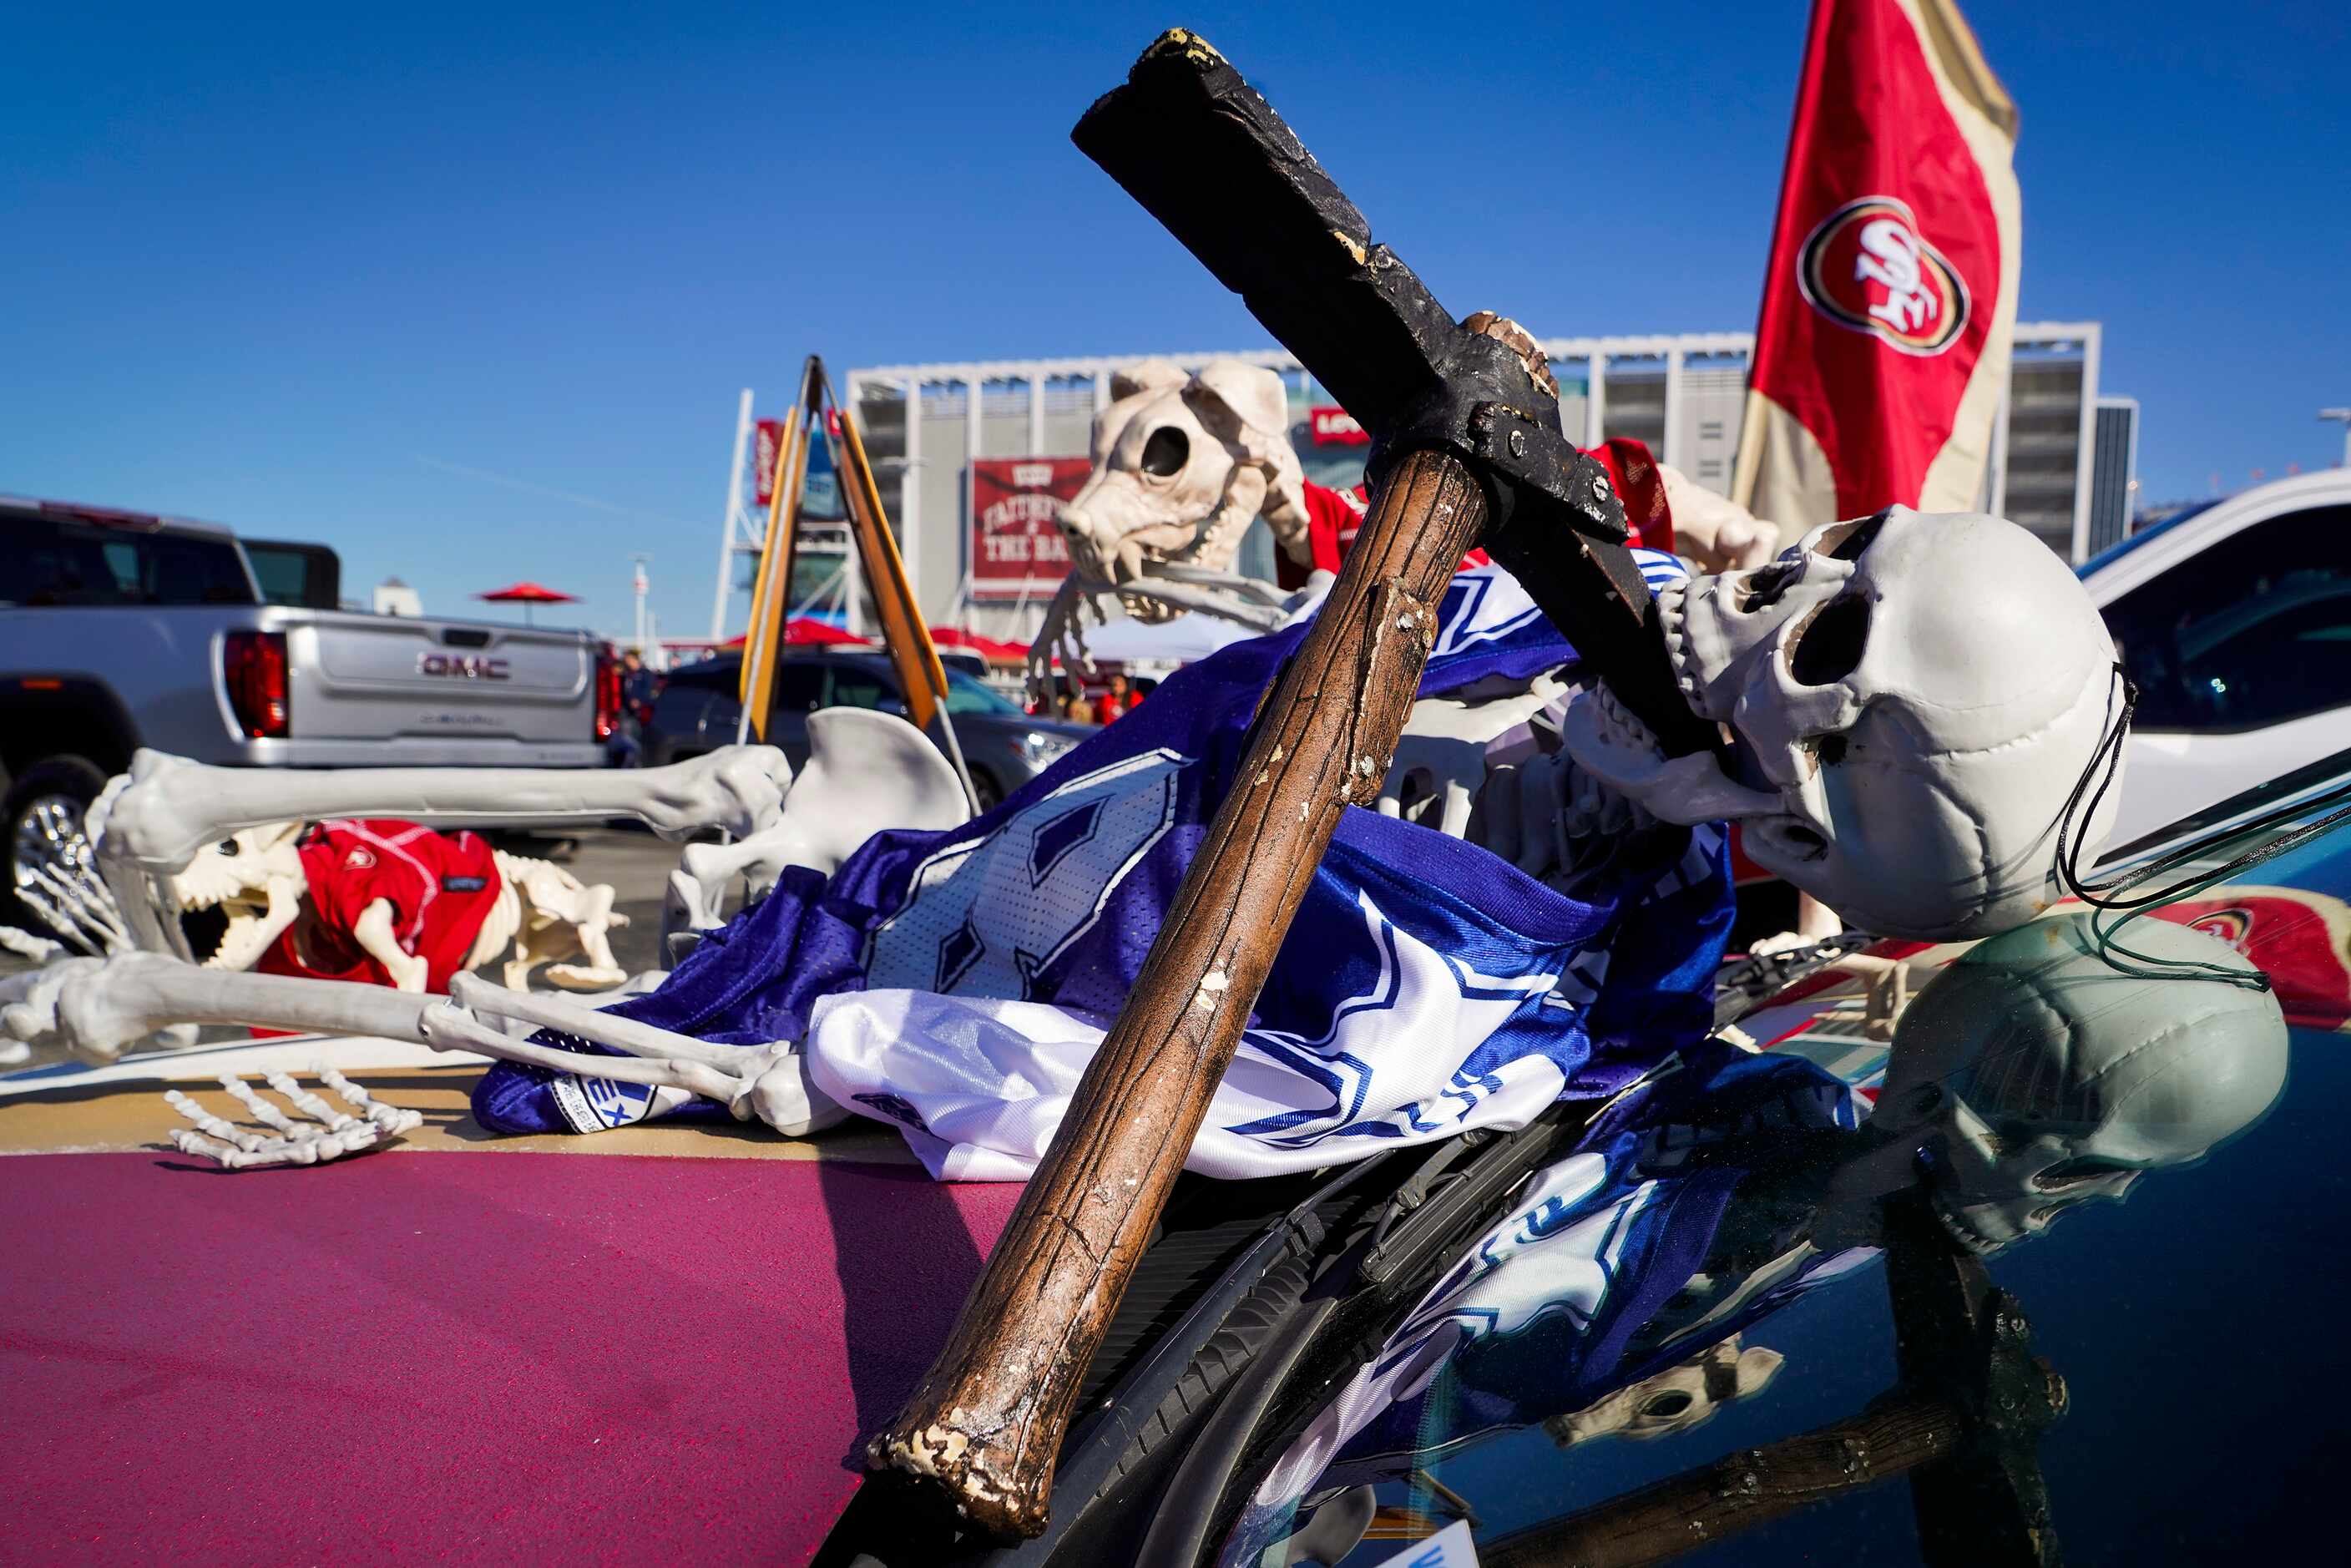 A fan’s tailgating setup depicts a Dallas Cowboys skeleton felled by the San Francisco 49ers...